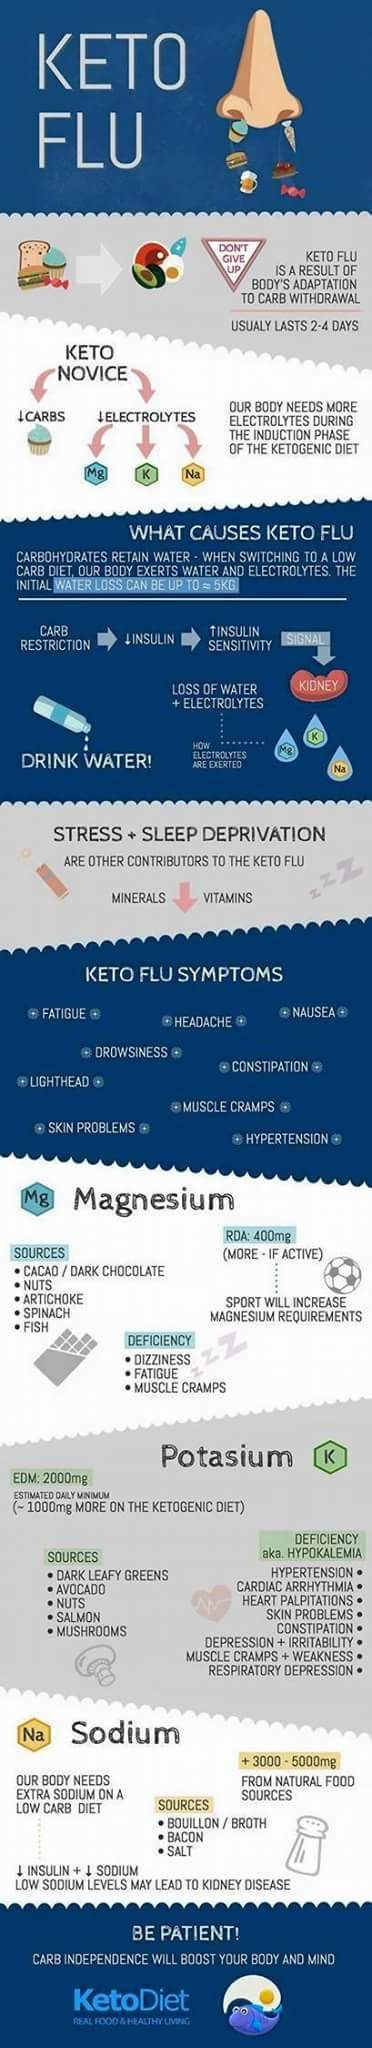 Keto Diet Flu
 12 best LCHF research images on Pinterest